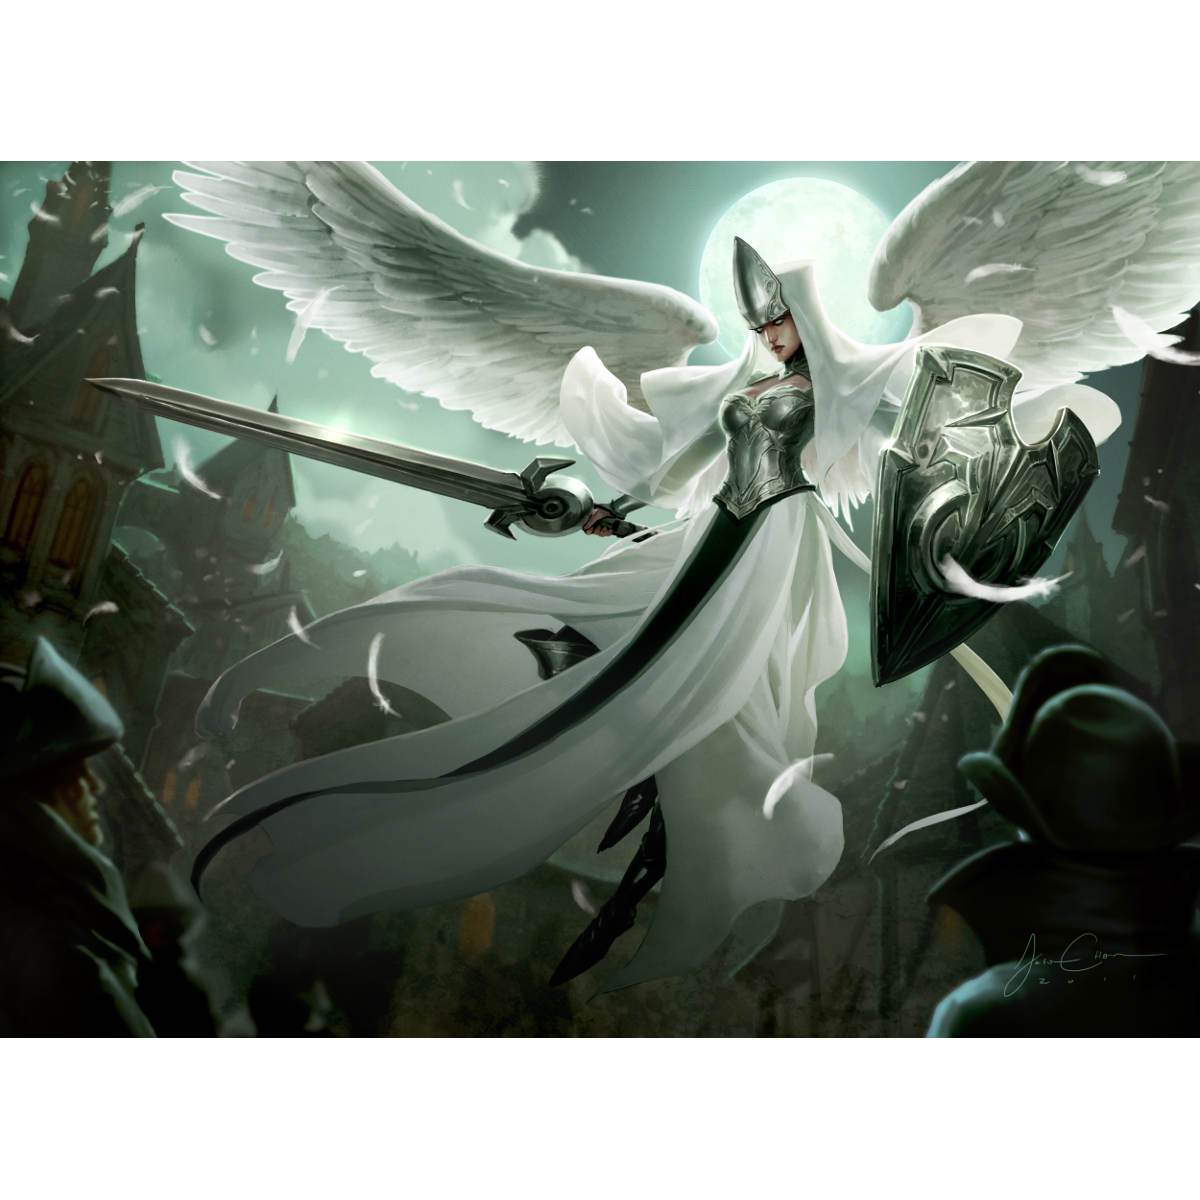 Angelic Overseer Print - Print - Original Magic Art - Accessories for Magic the Gathering and other card games